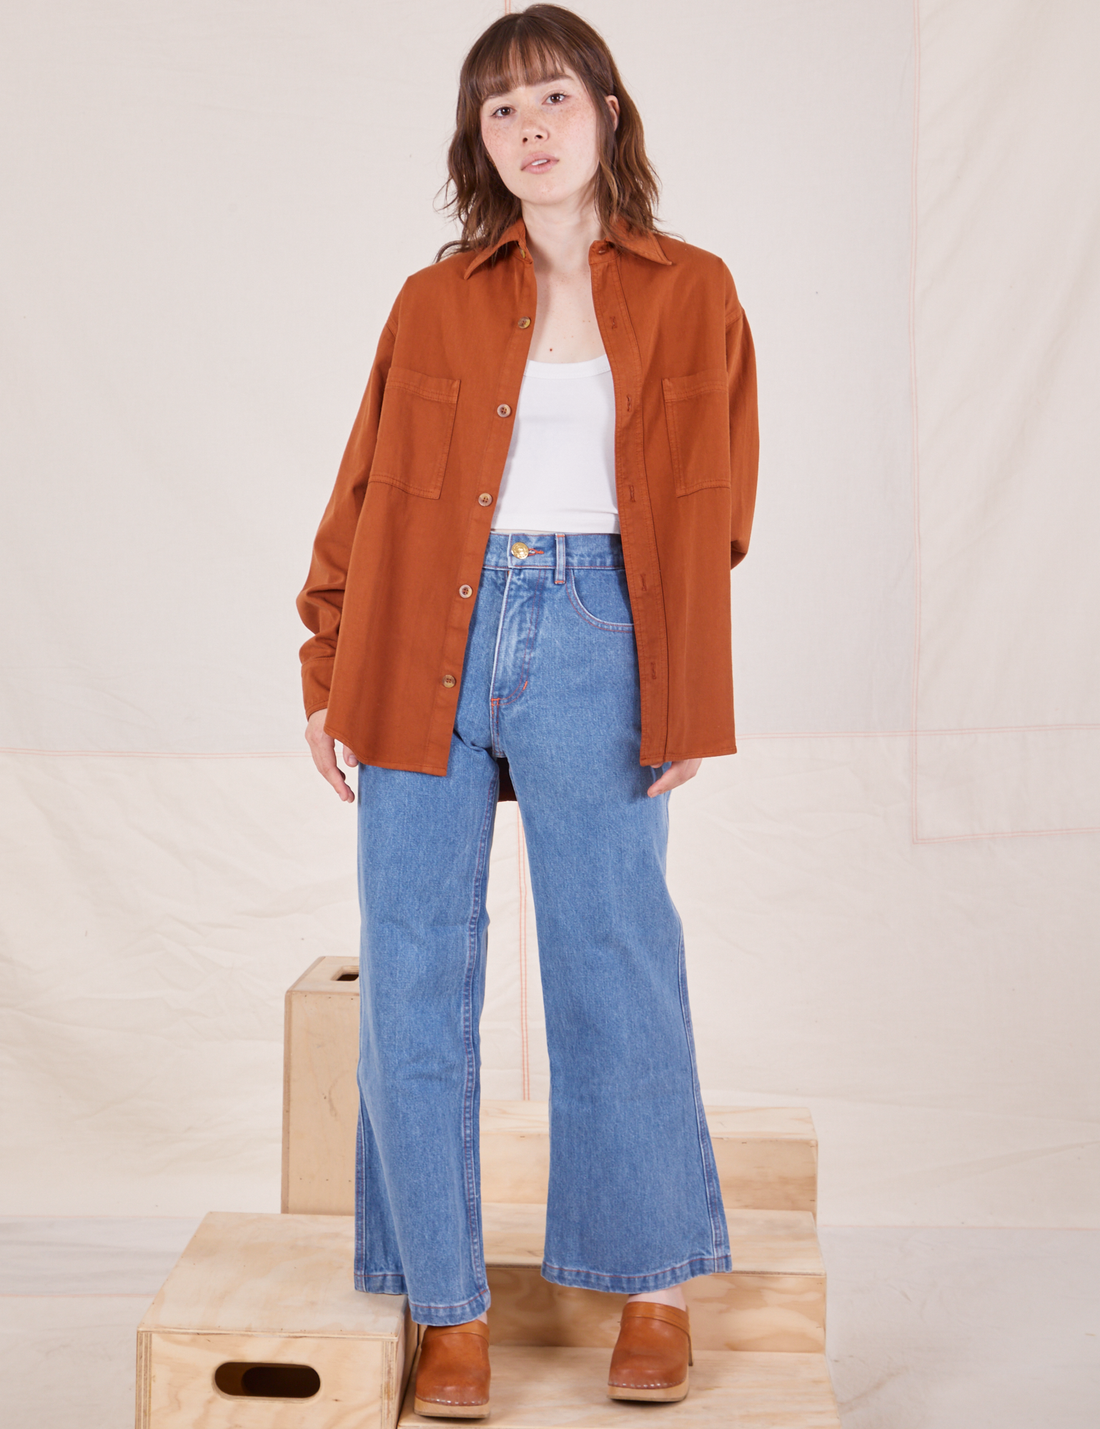 Hana is wearing Oversize Overshirt in Burnt Terracotta paired with vintage off-white Cropped Tank Top and light wash Sailor Jeans